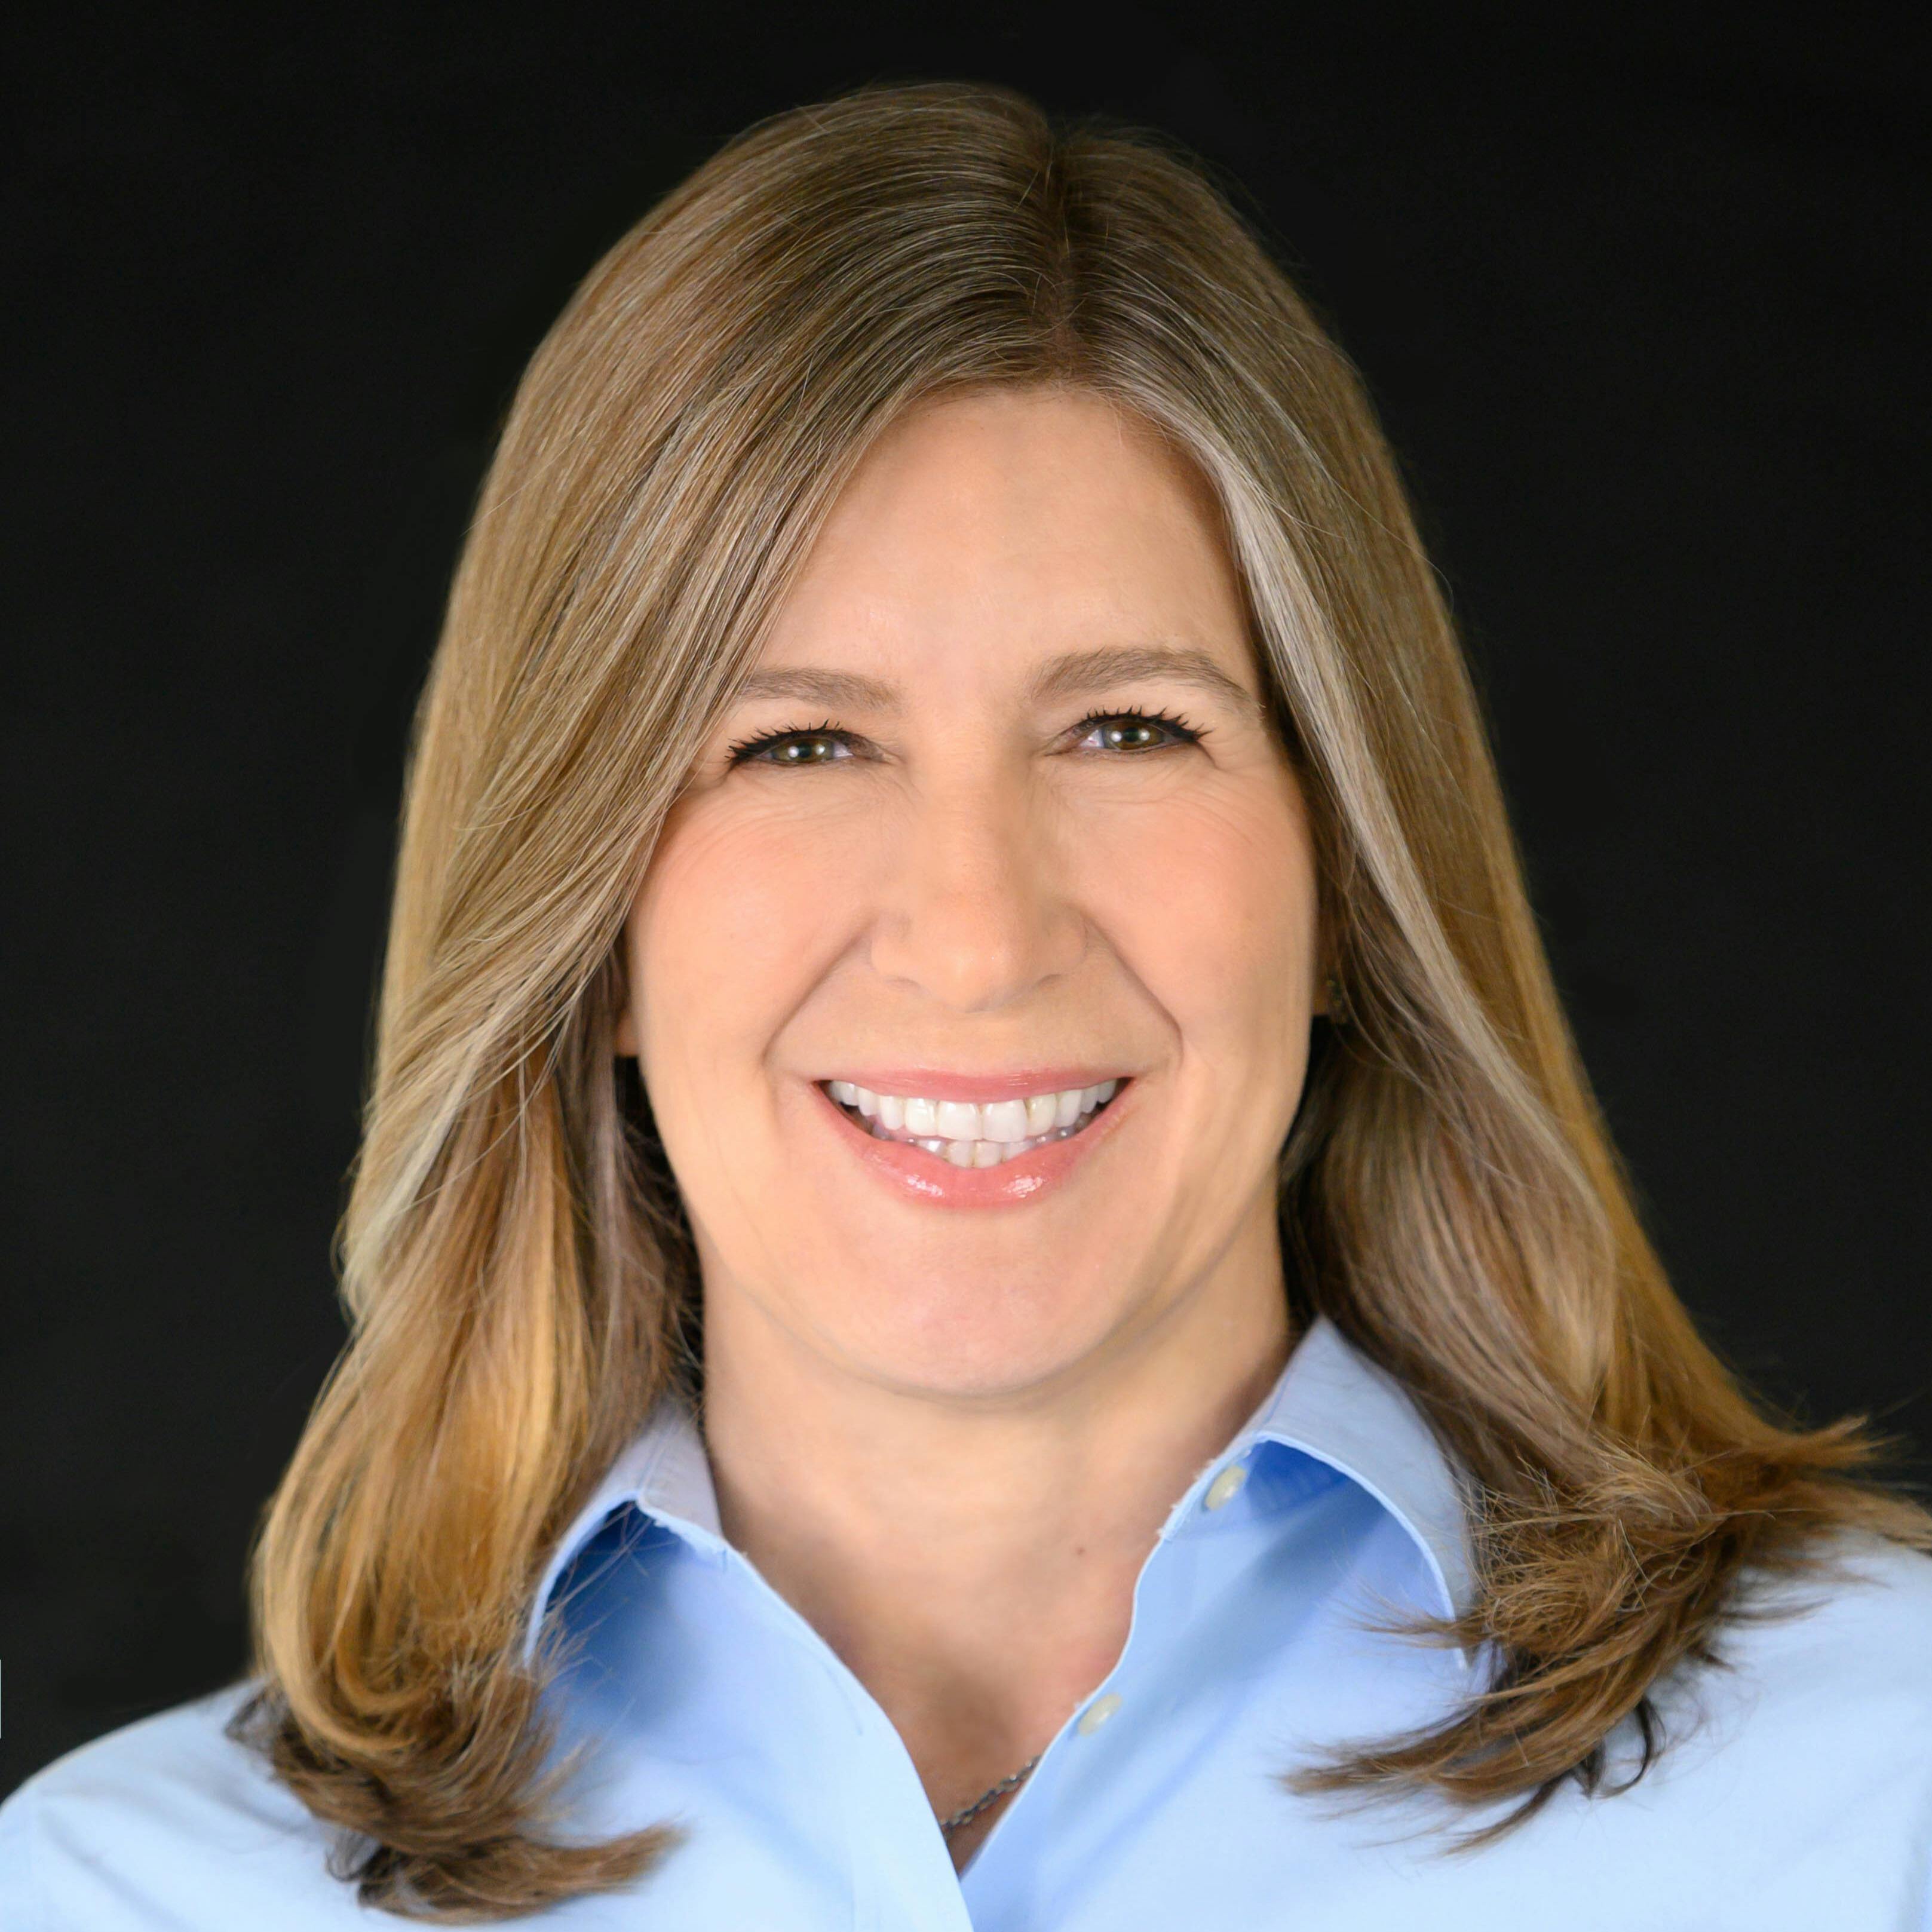 Curative Promotes Current Chief Financial Officer Tami Wilson-Ciranna to President